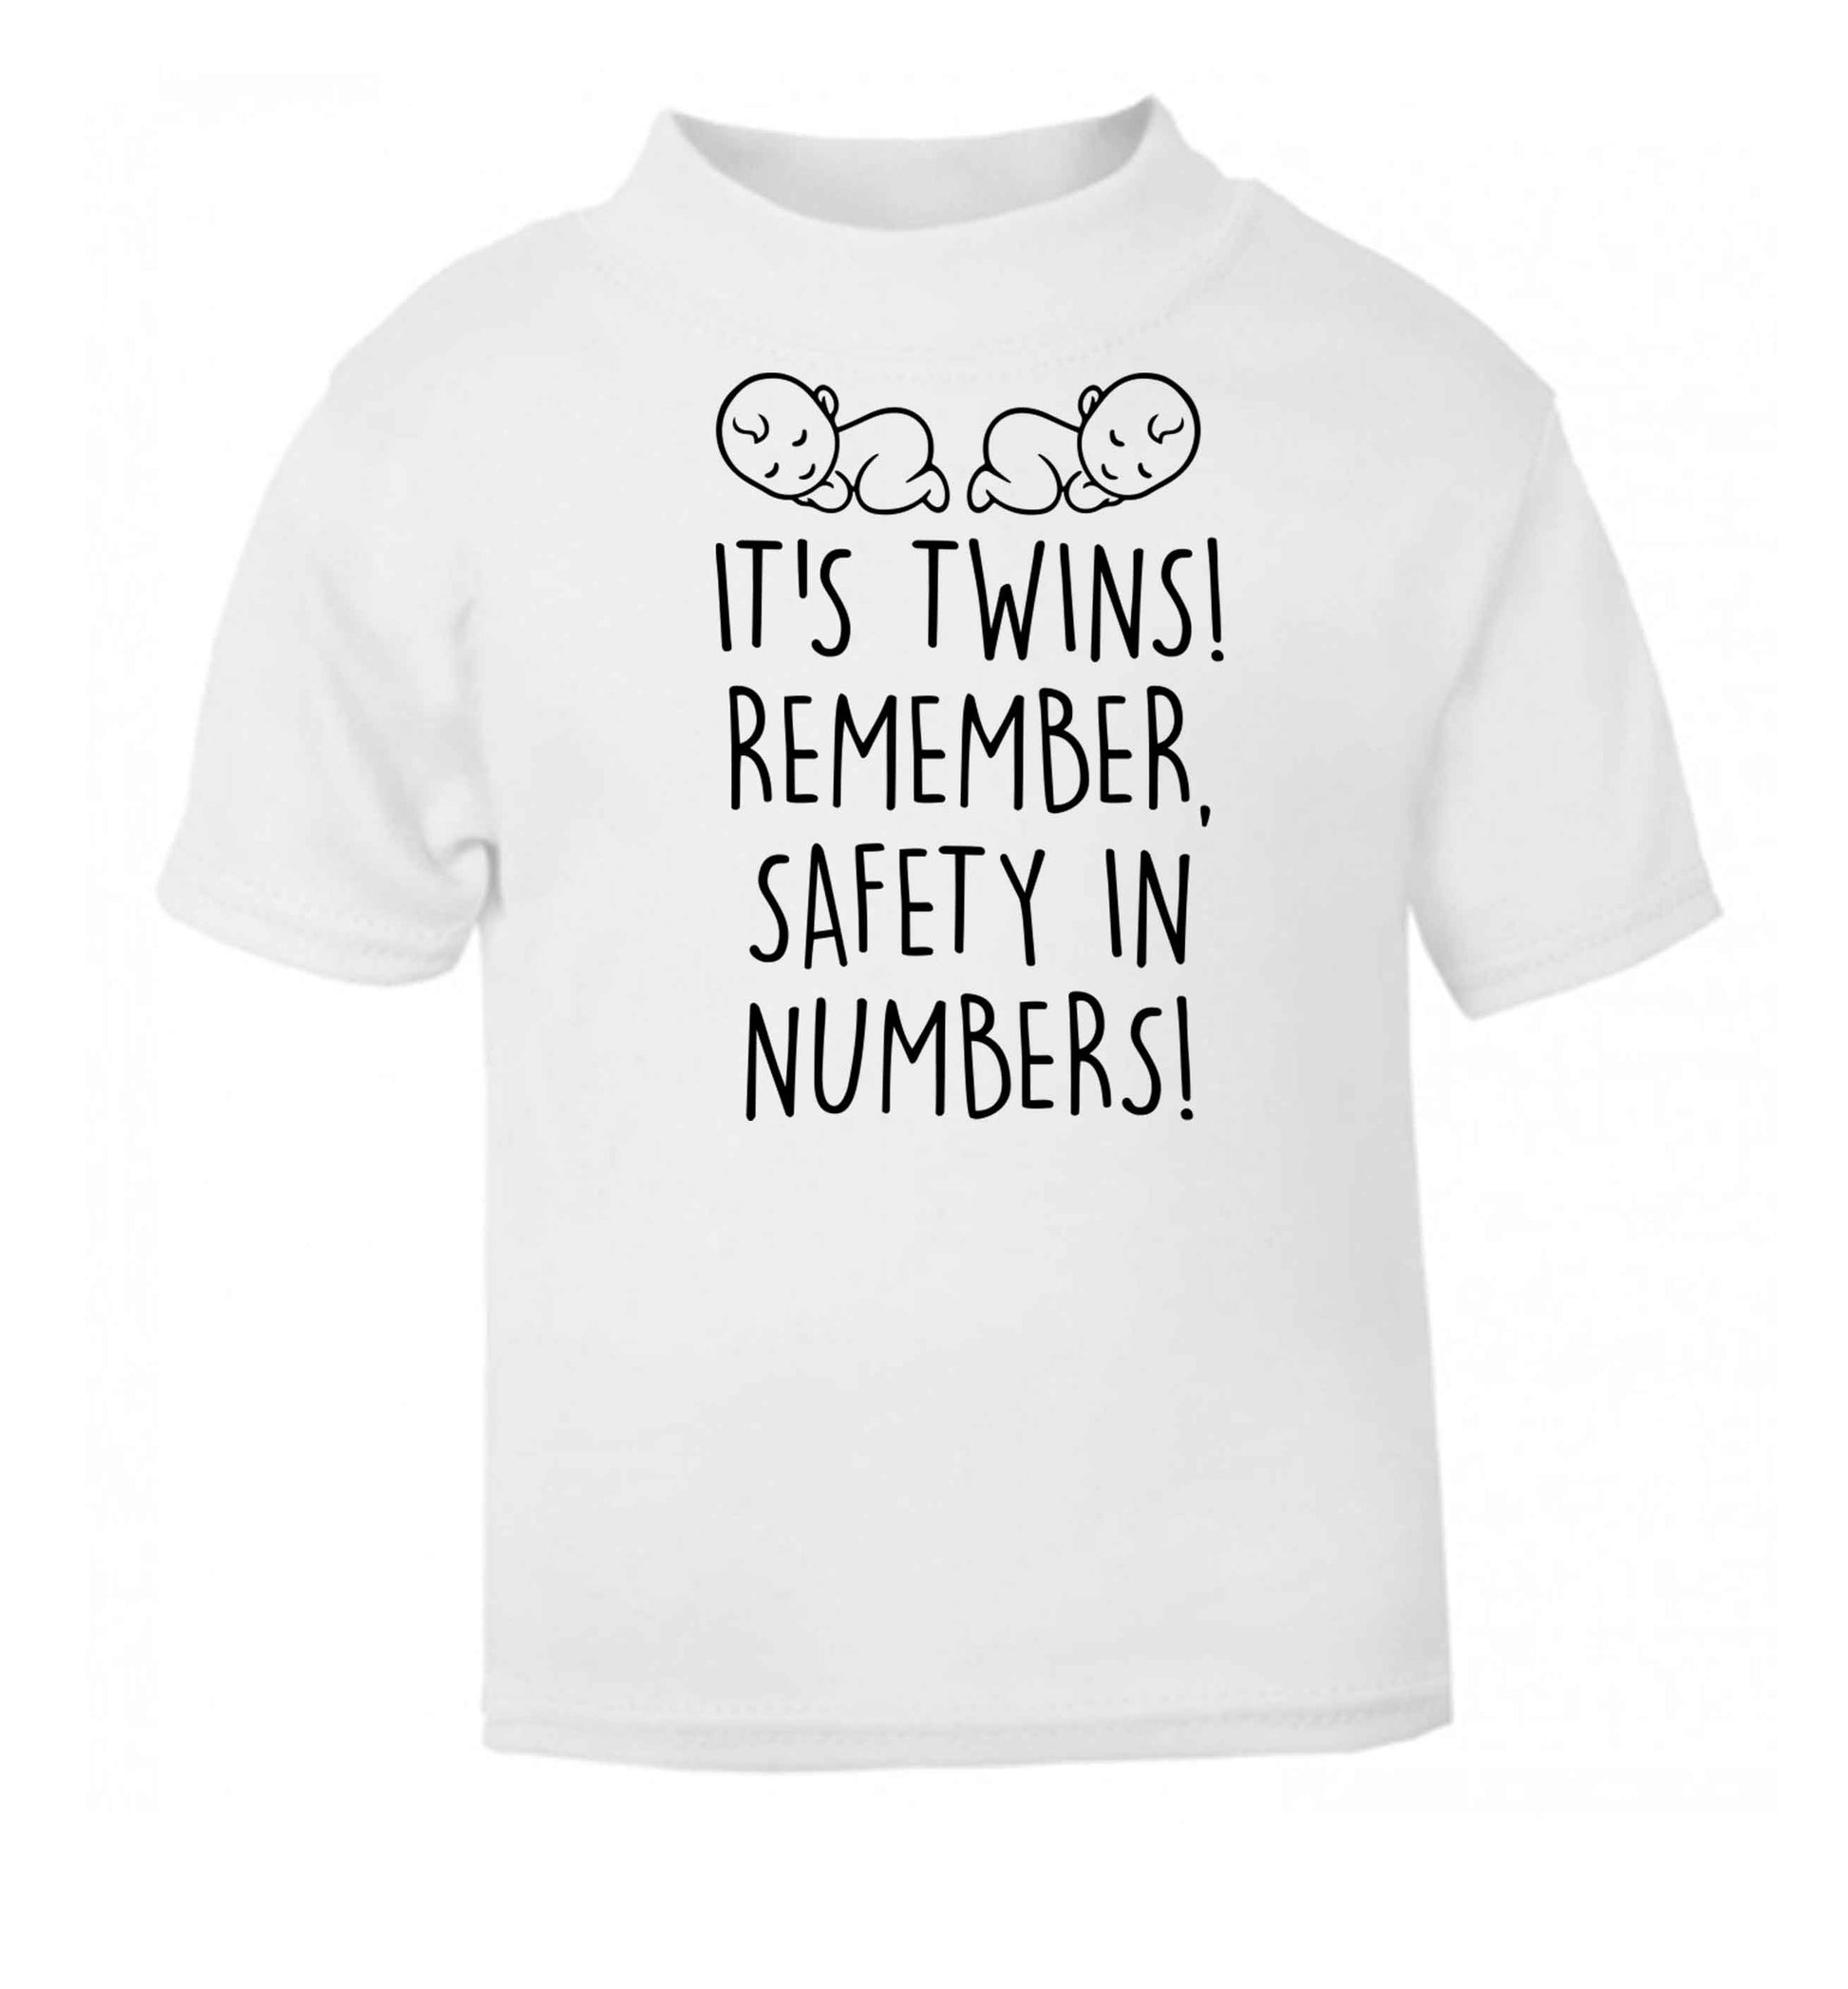 It's twins! Remember safety in numbers! white baby toddler Tshirt 2 Years